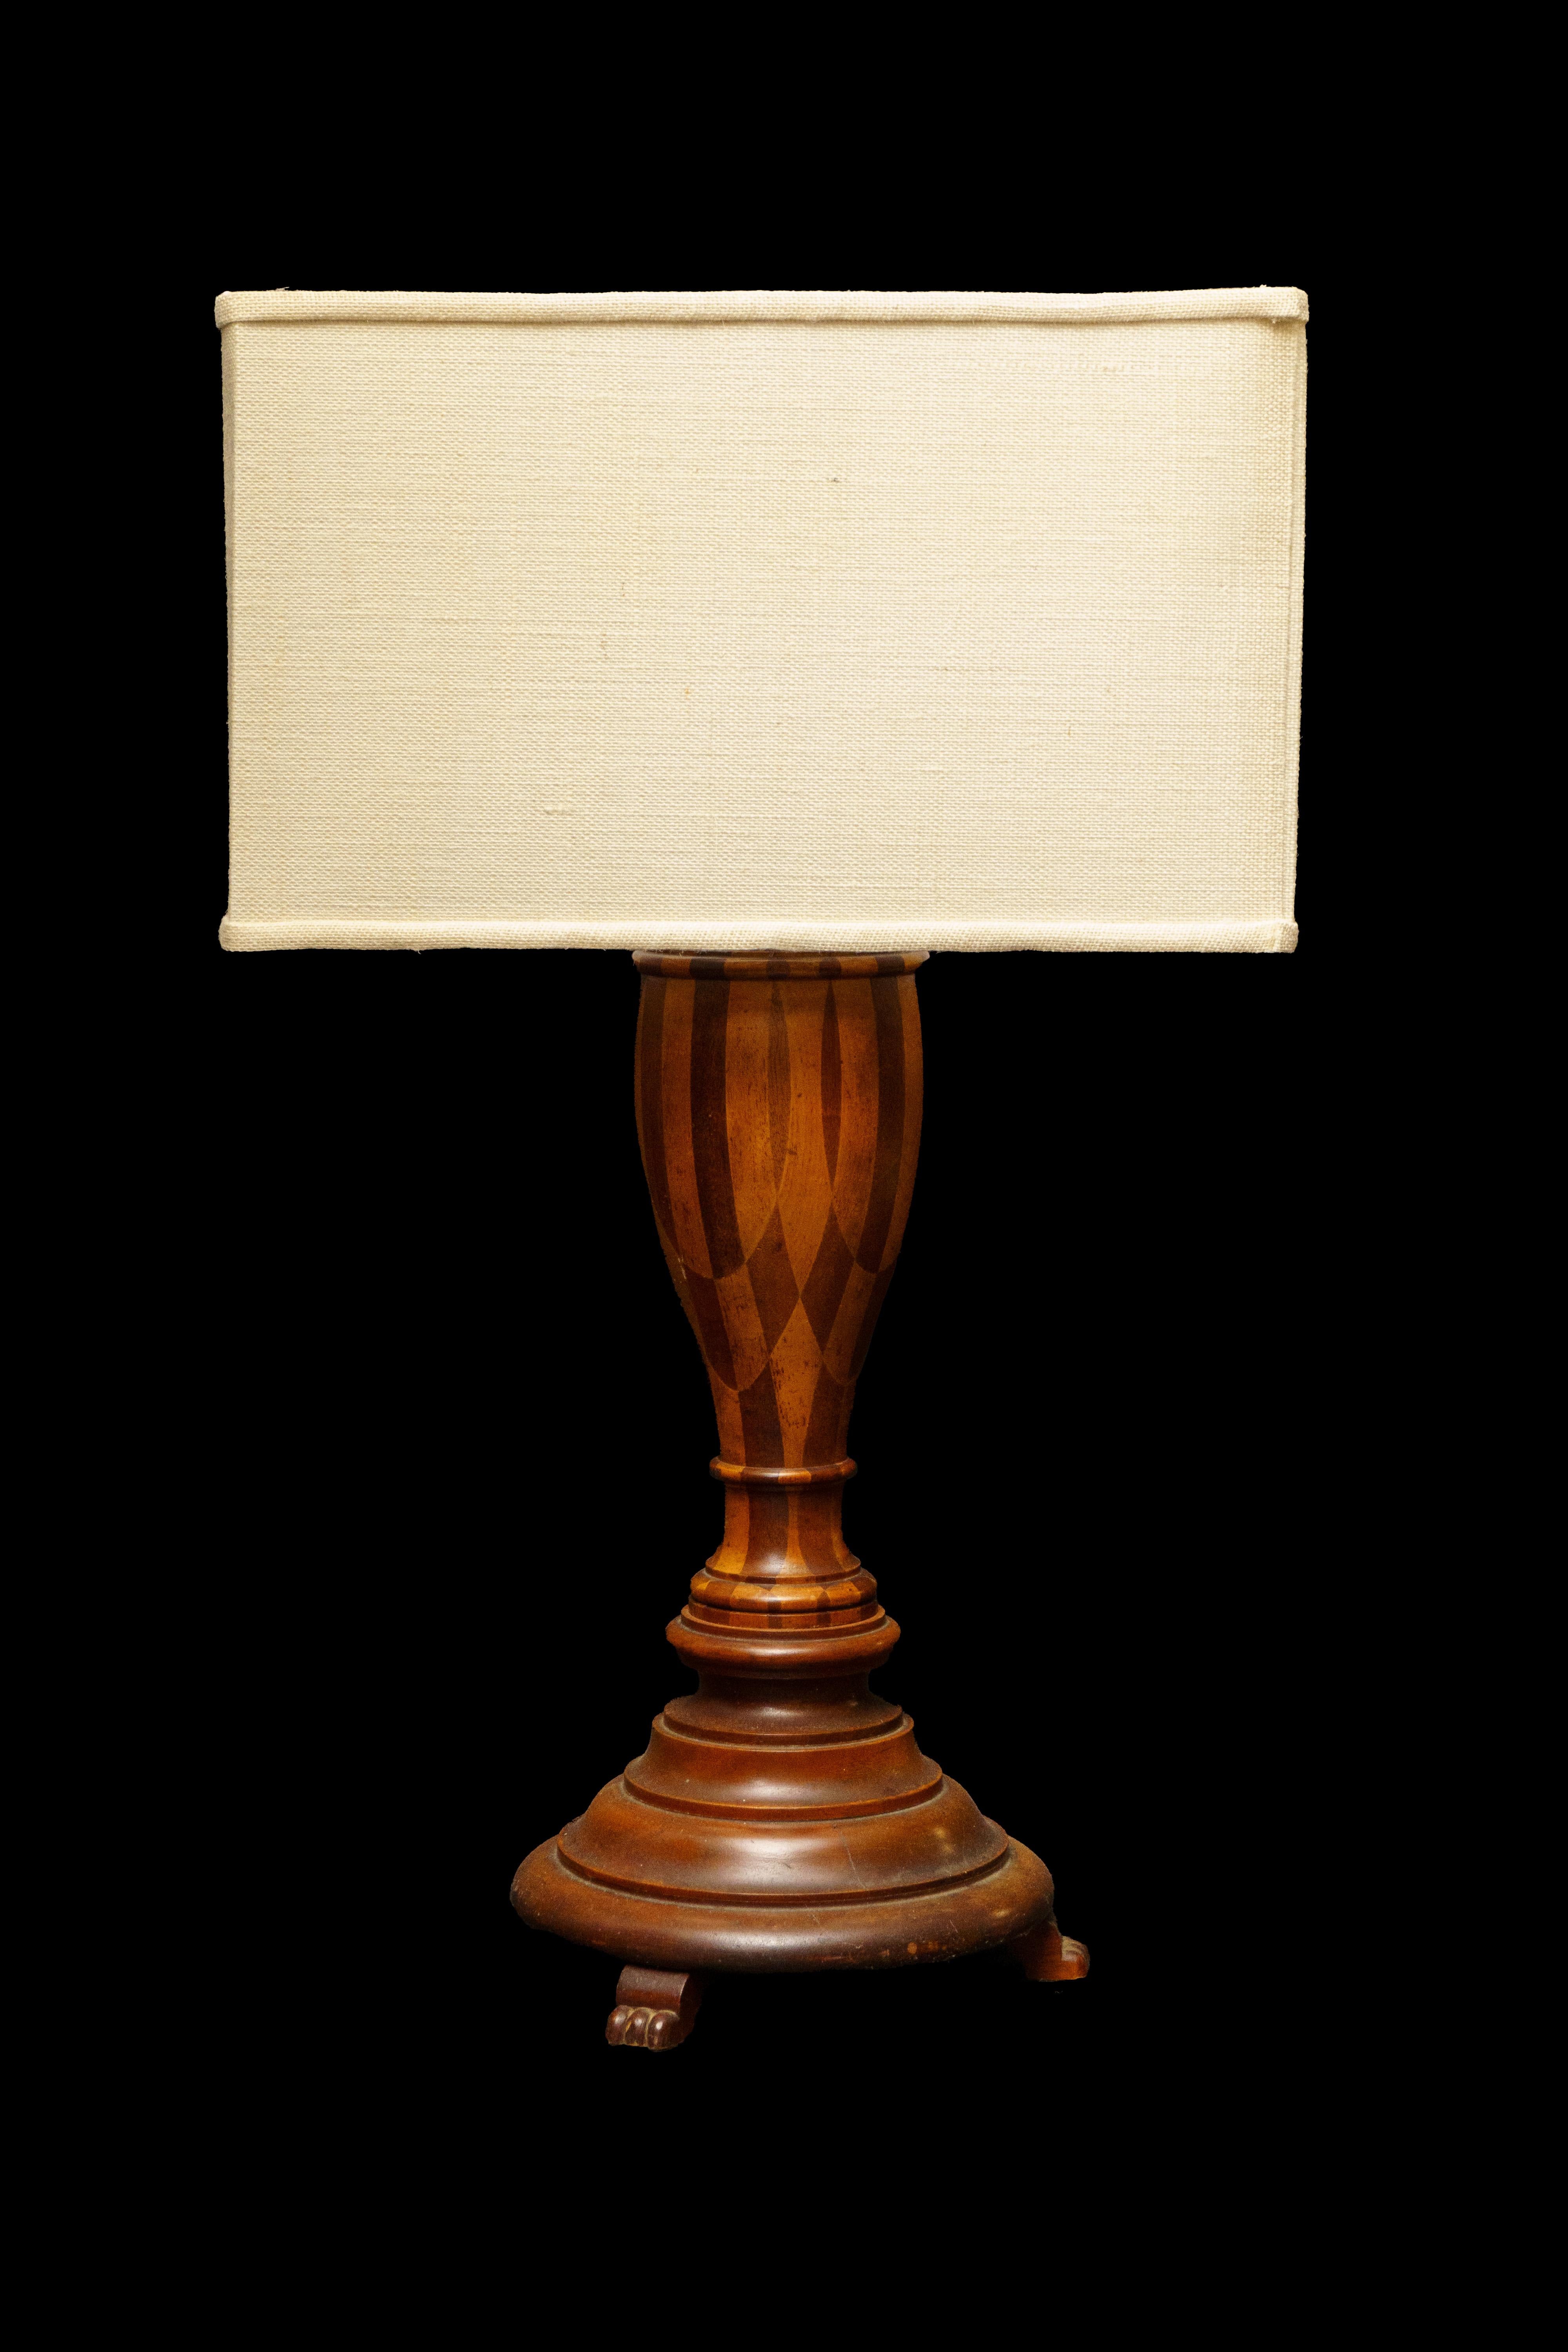 Marquetry lamp:

Measures: 20